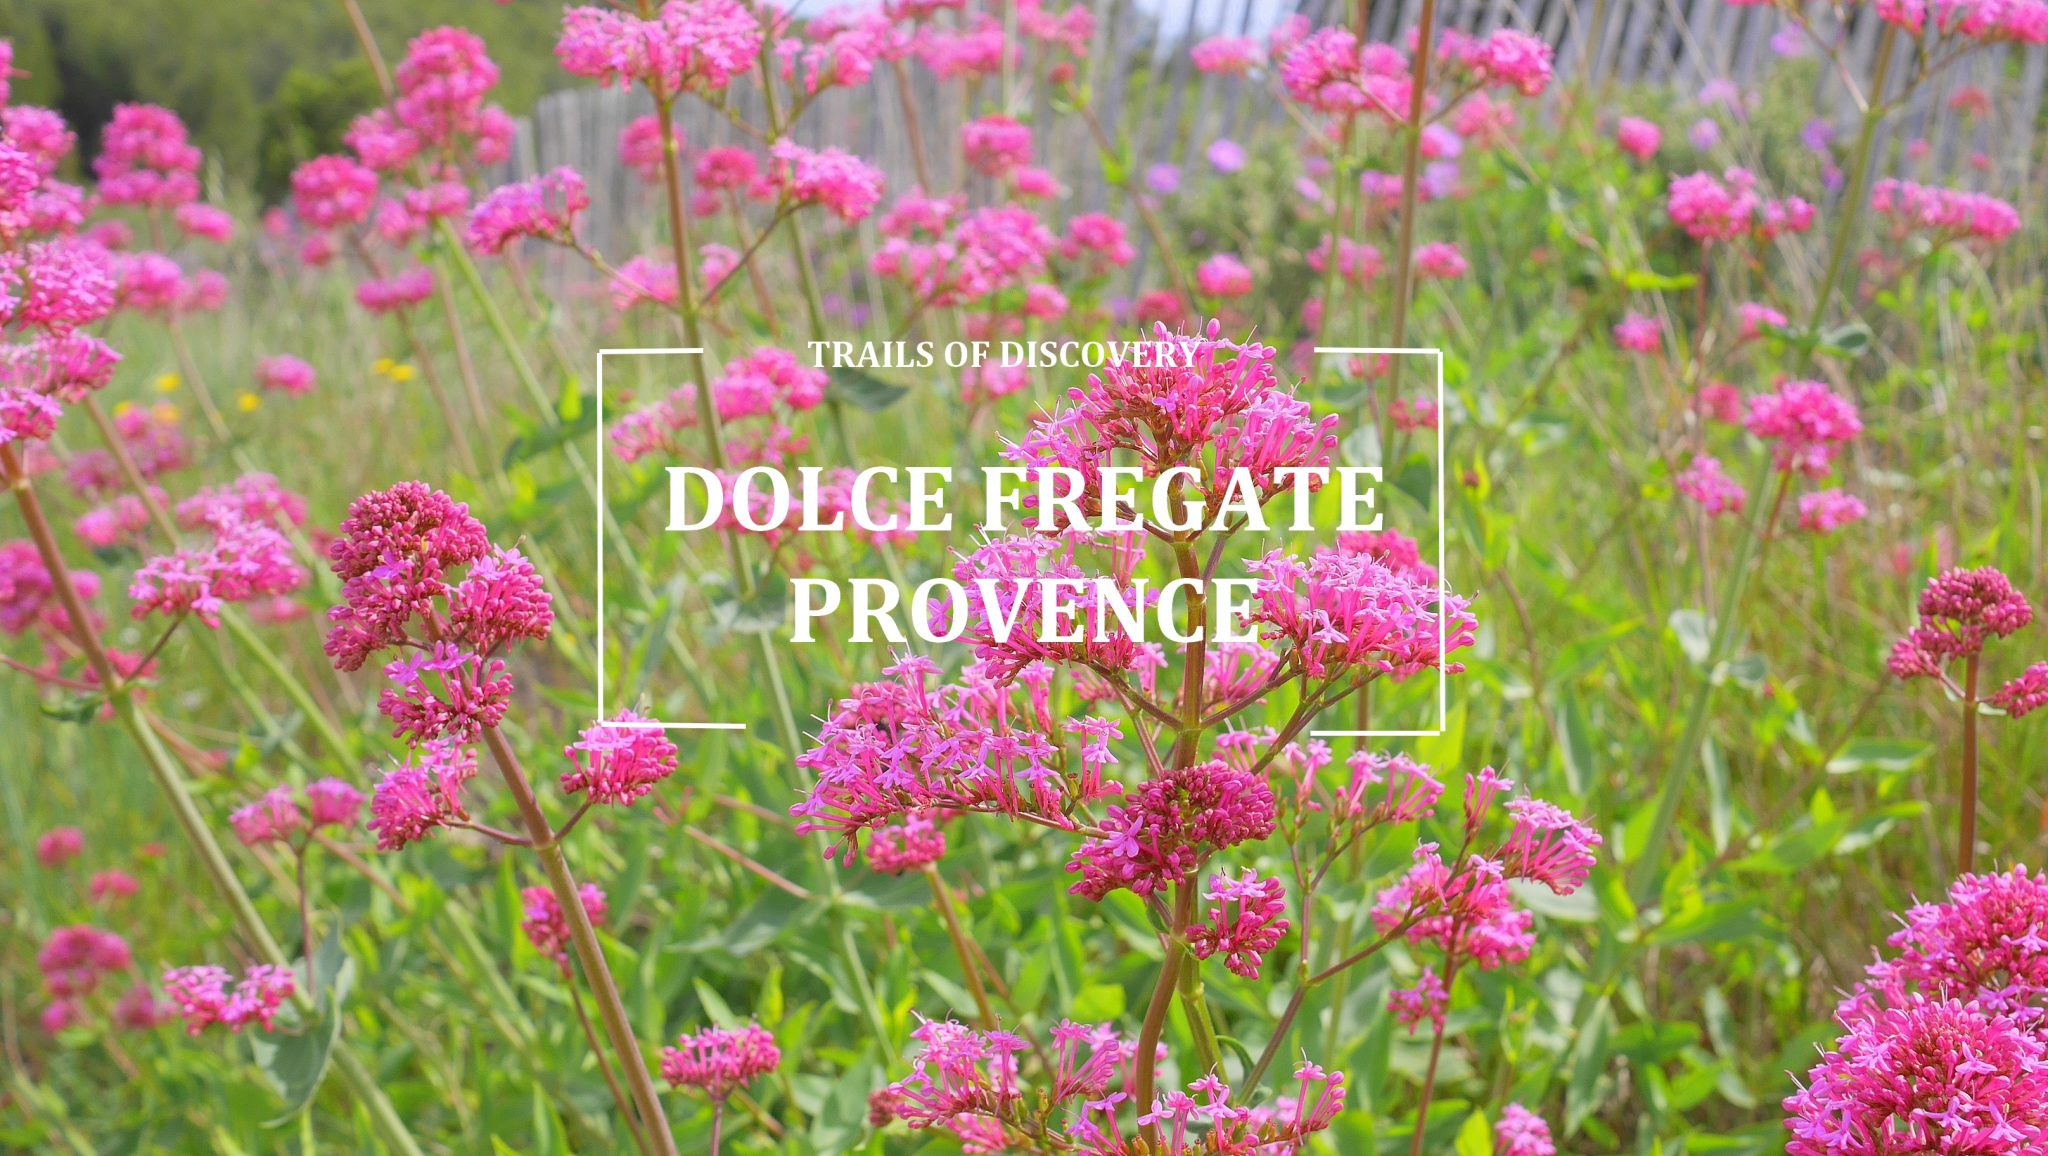 Trails-discovery-dolce-fregate-provence